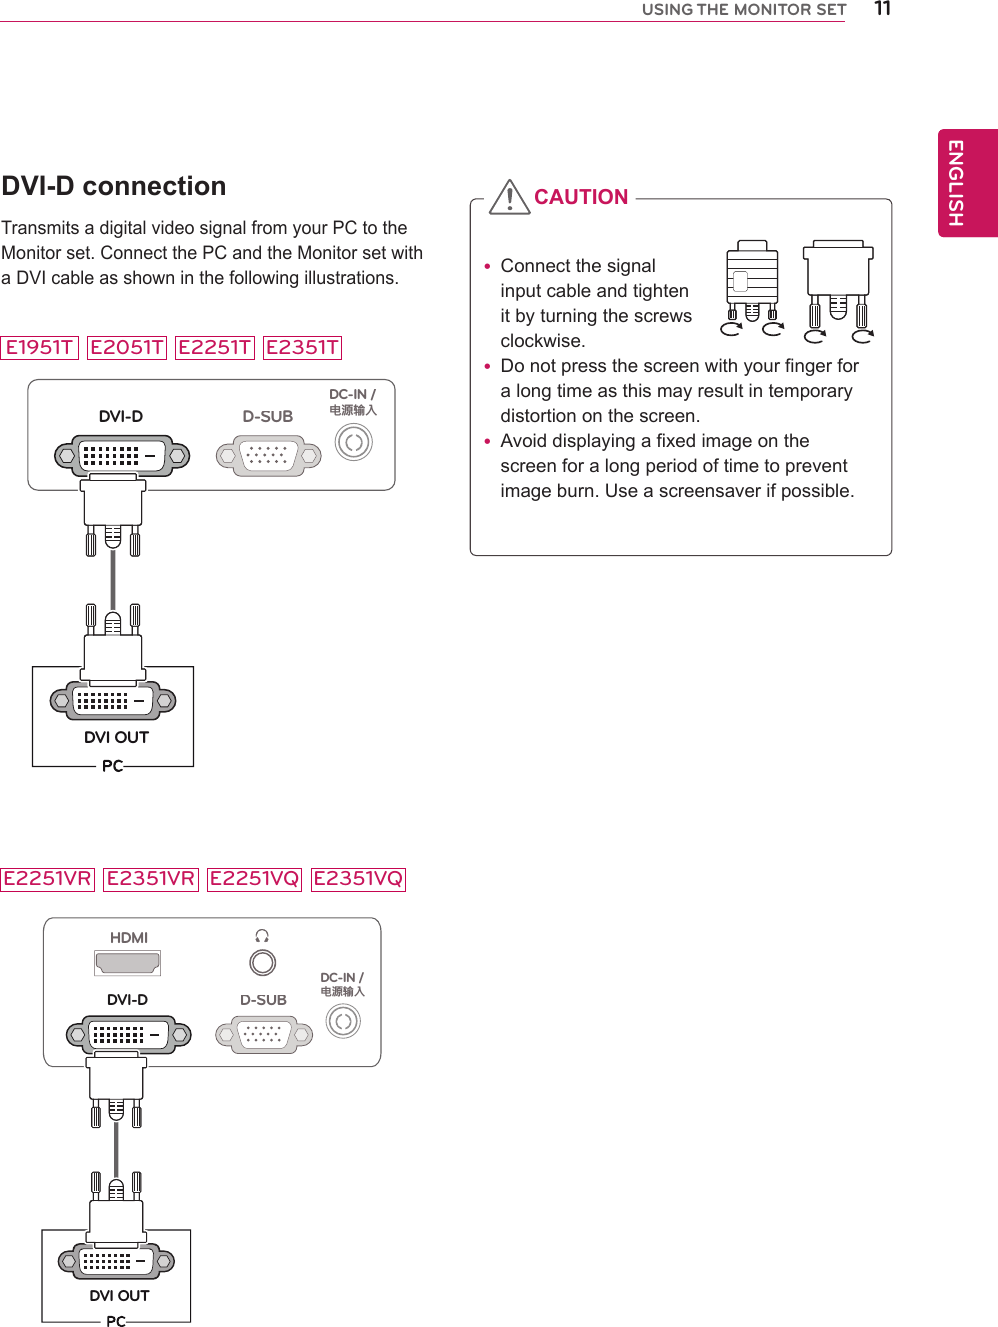 11ENGENGLISHUSING THE MONITOR SETDVI-D connectionTransmits a digital video signal from your PC to the Monitor set. Connect the PC and the Monitor set with a DVI cable as shown in the following illustrations.D-SUBDVI-DDVI OUTDC-IN /䏳㵎幑‣HDMID-SUBDVI-DDVI OUTDC-IN /䏳㵎幑‣ yConnect the signal input cable and tighten it by turning the screws clockwise. yDo not press the screen with your finger for  a long time as this may result in temporary distortion on the screen. yAvoid displaying a fixed image on the screen for a long period of time to prevent image burn. Use a screensaver if possible.CAUTIONE2051TE1951T E2251T E2351TE2251VR E2351VR E2251VQ E2351VQ